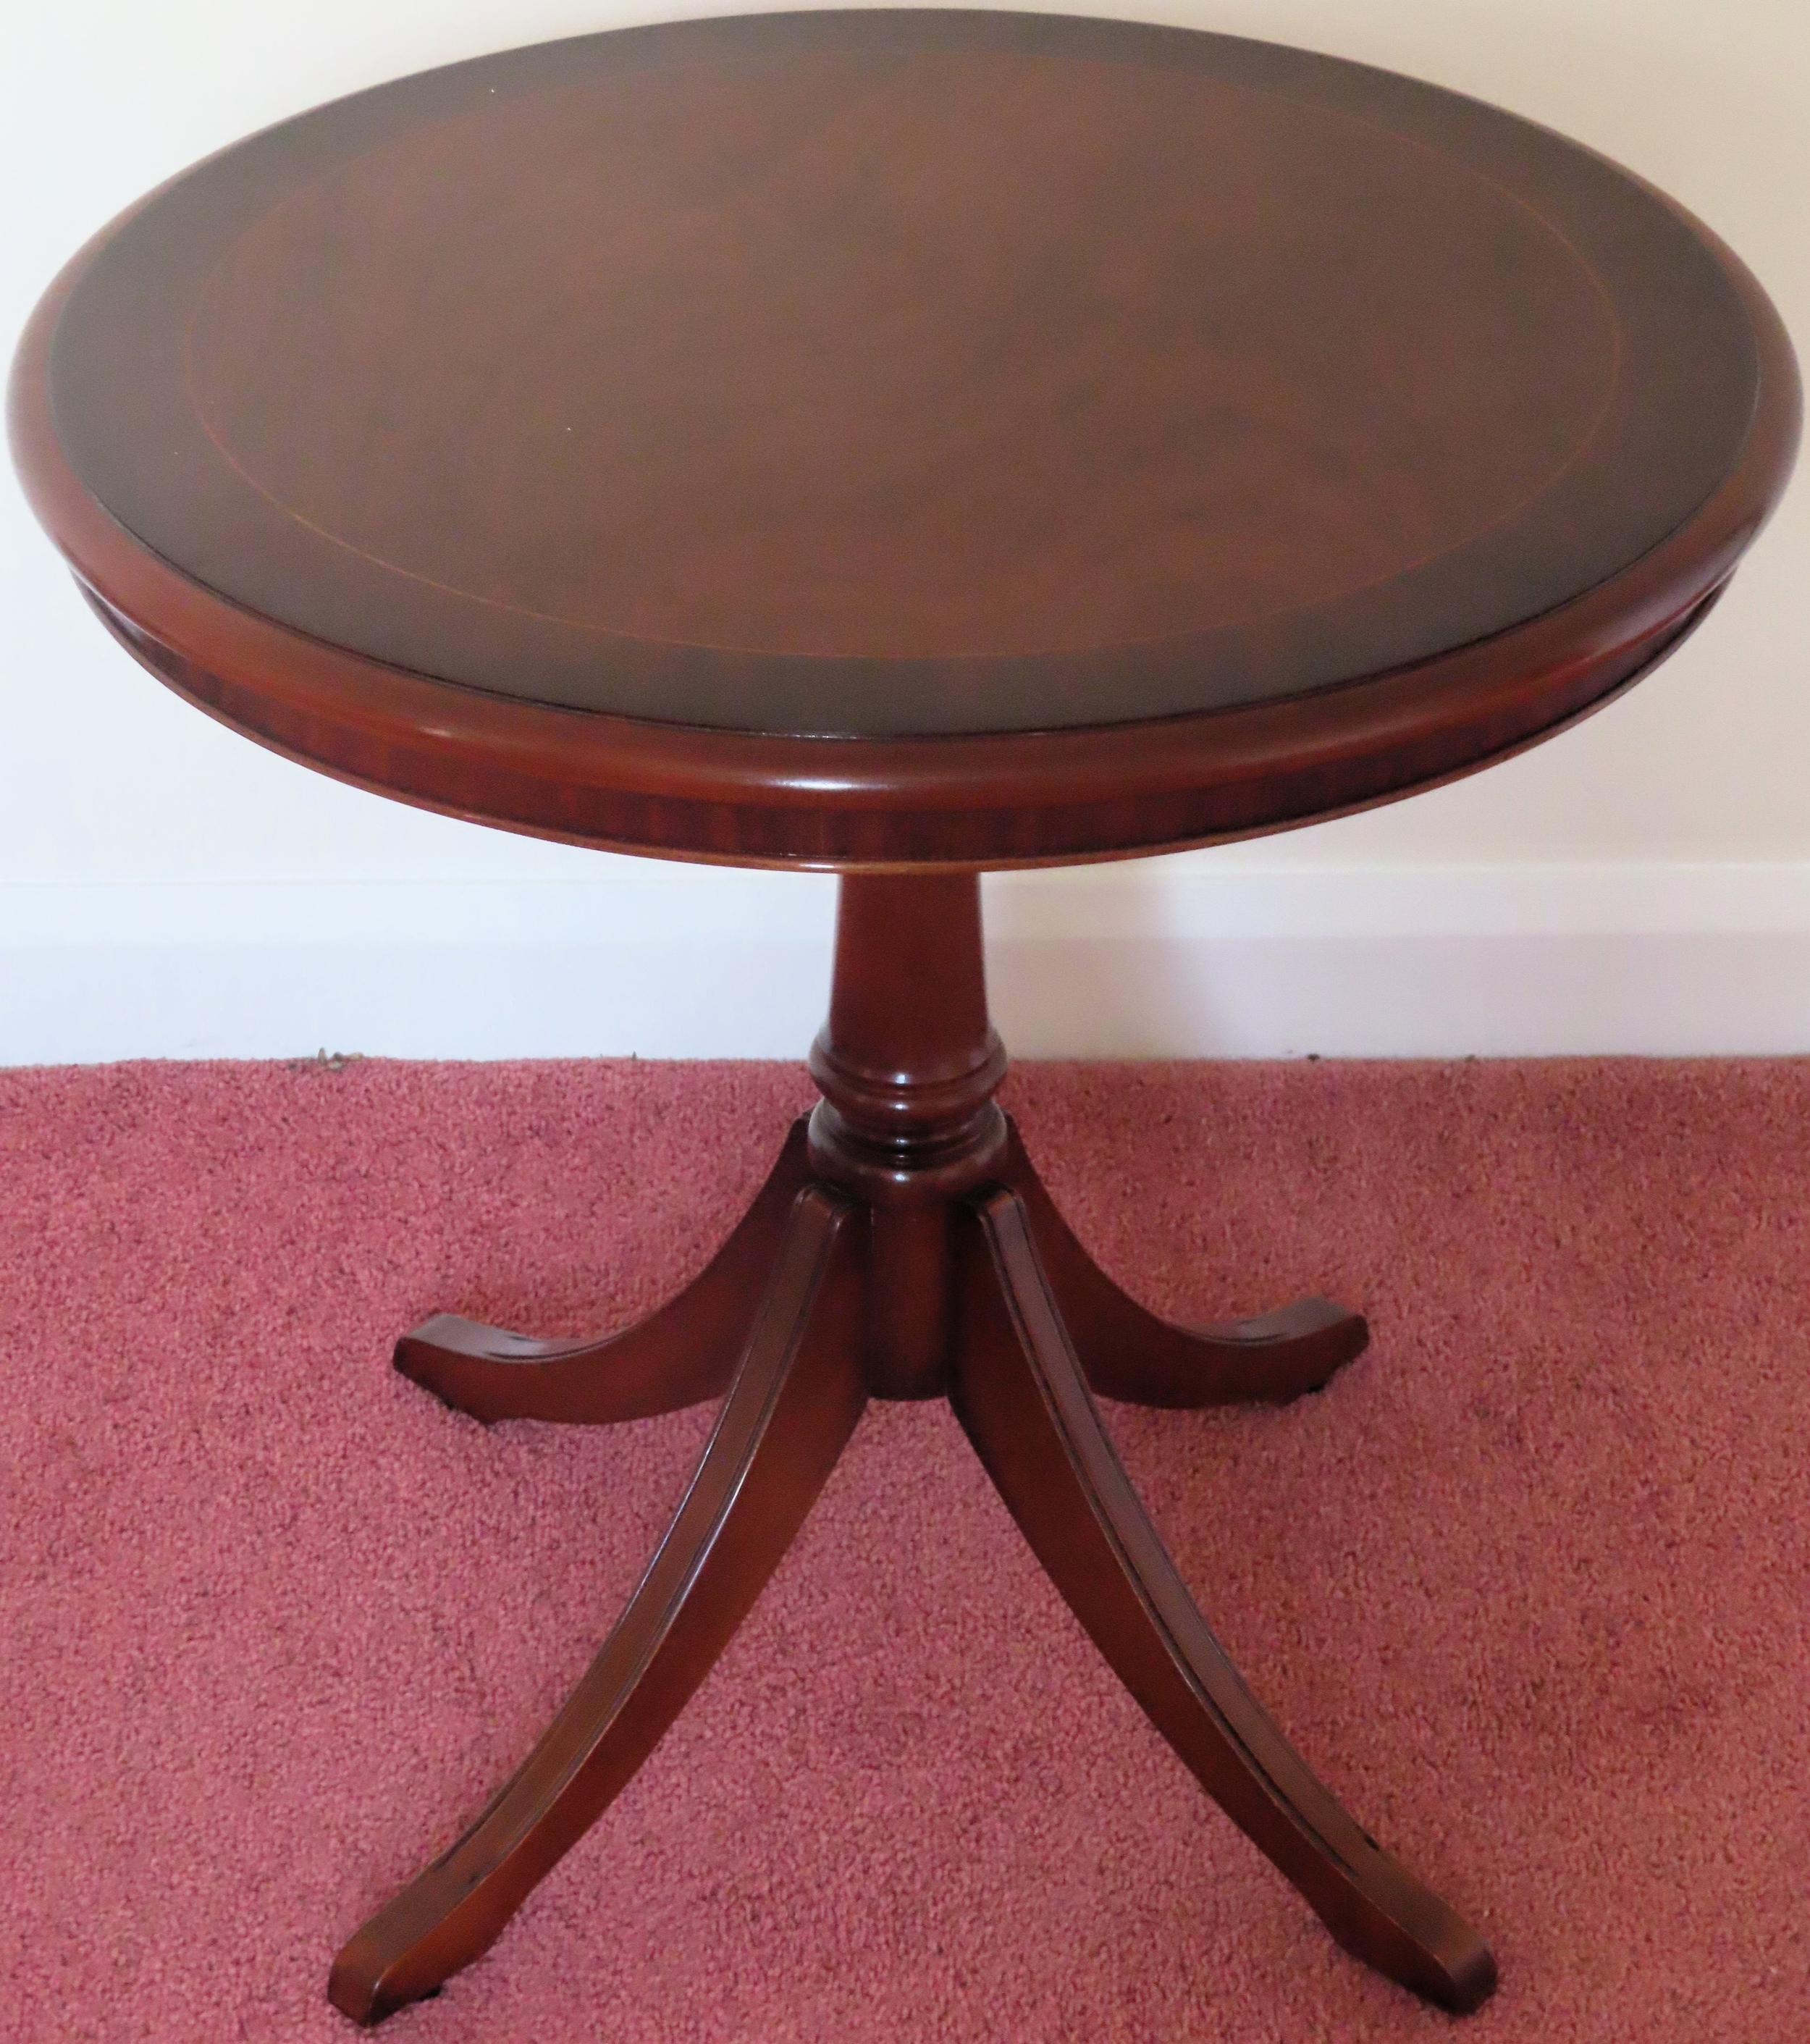 20th century mahogany inlaid circular side table on quad supports. Approx. 53 x 56cms reasonable